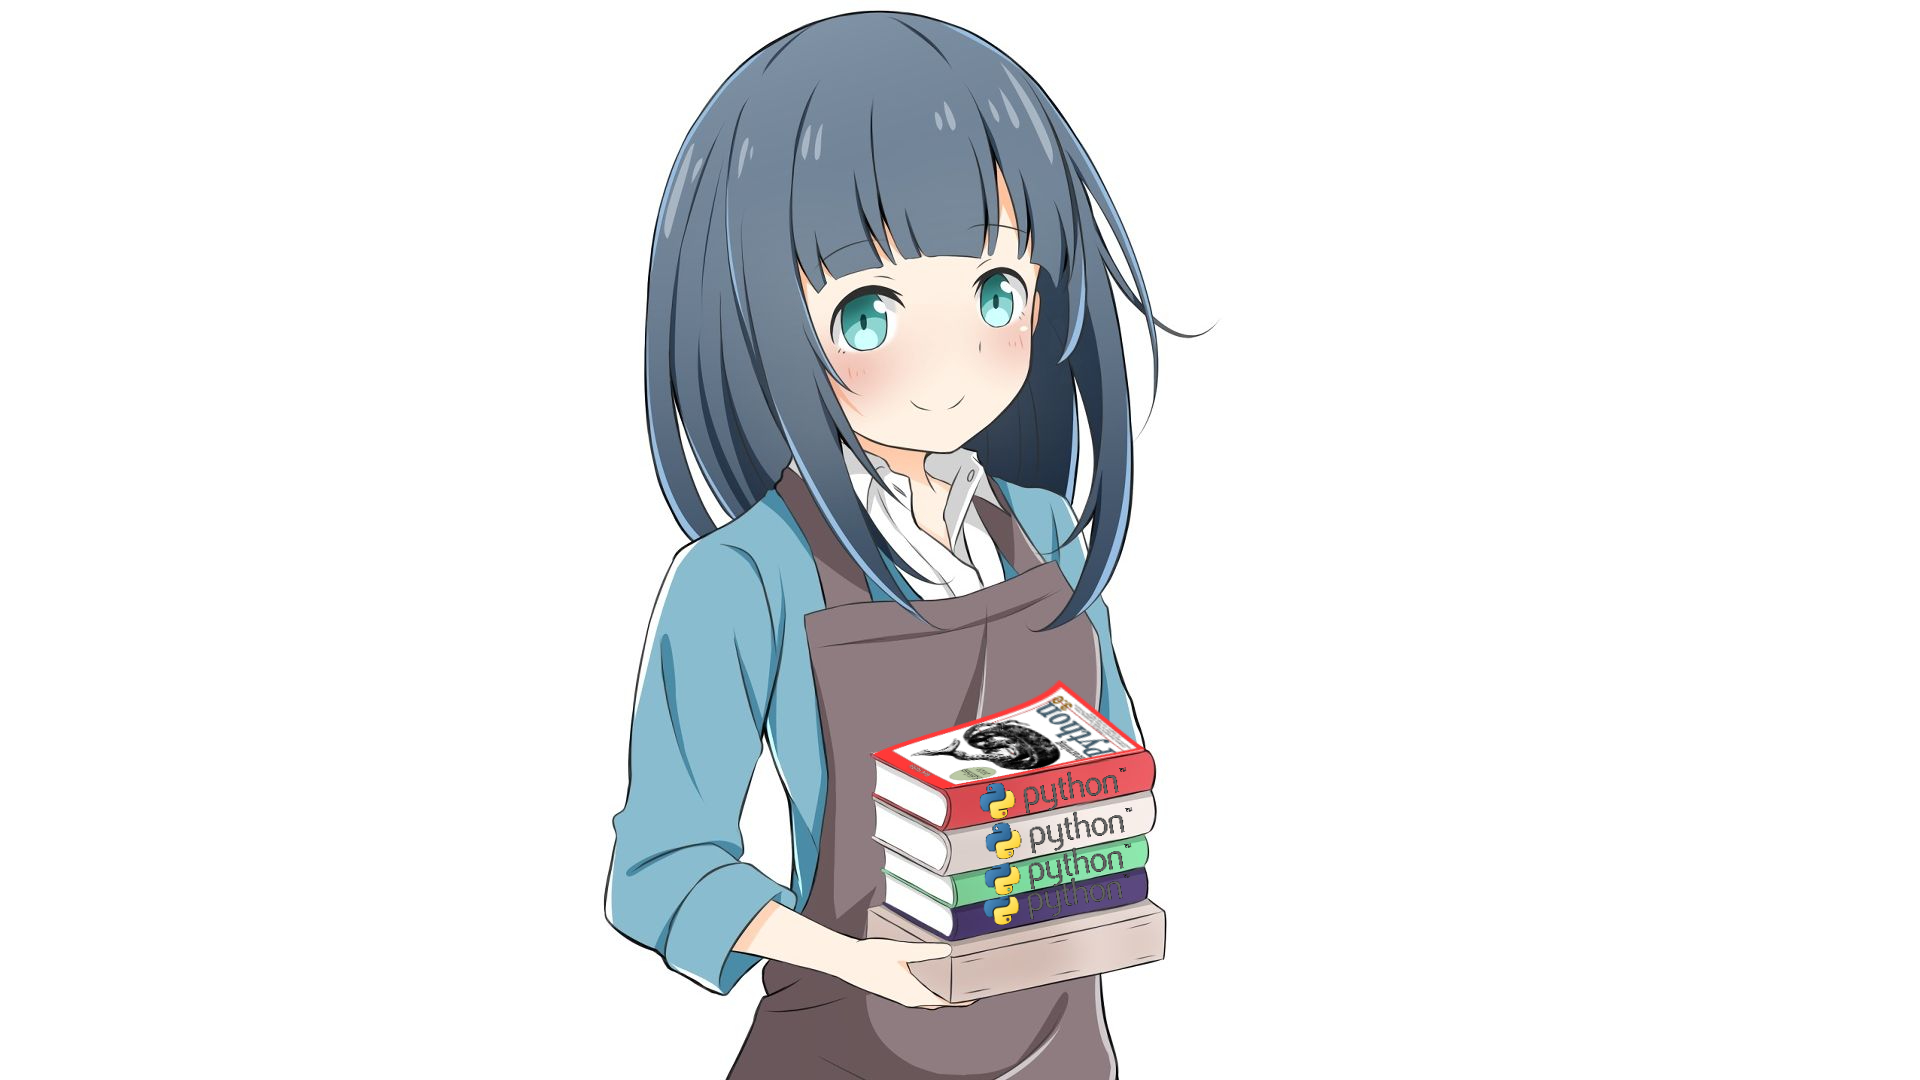 Picture of anime girl holding a python book